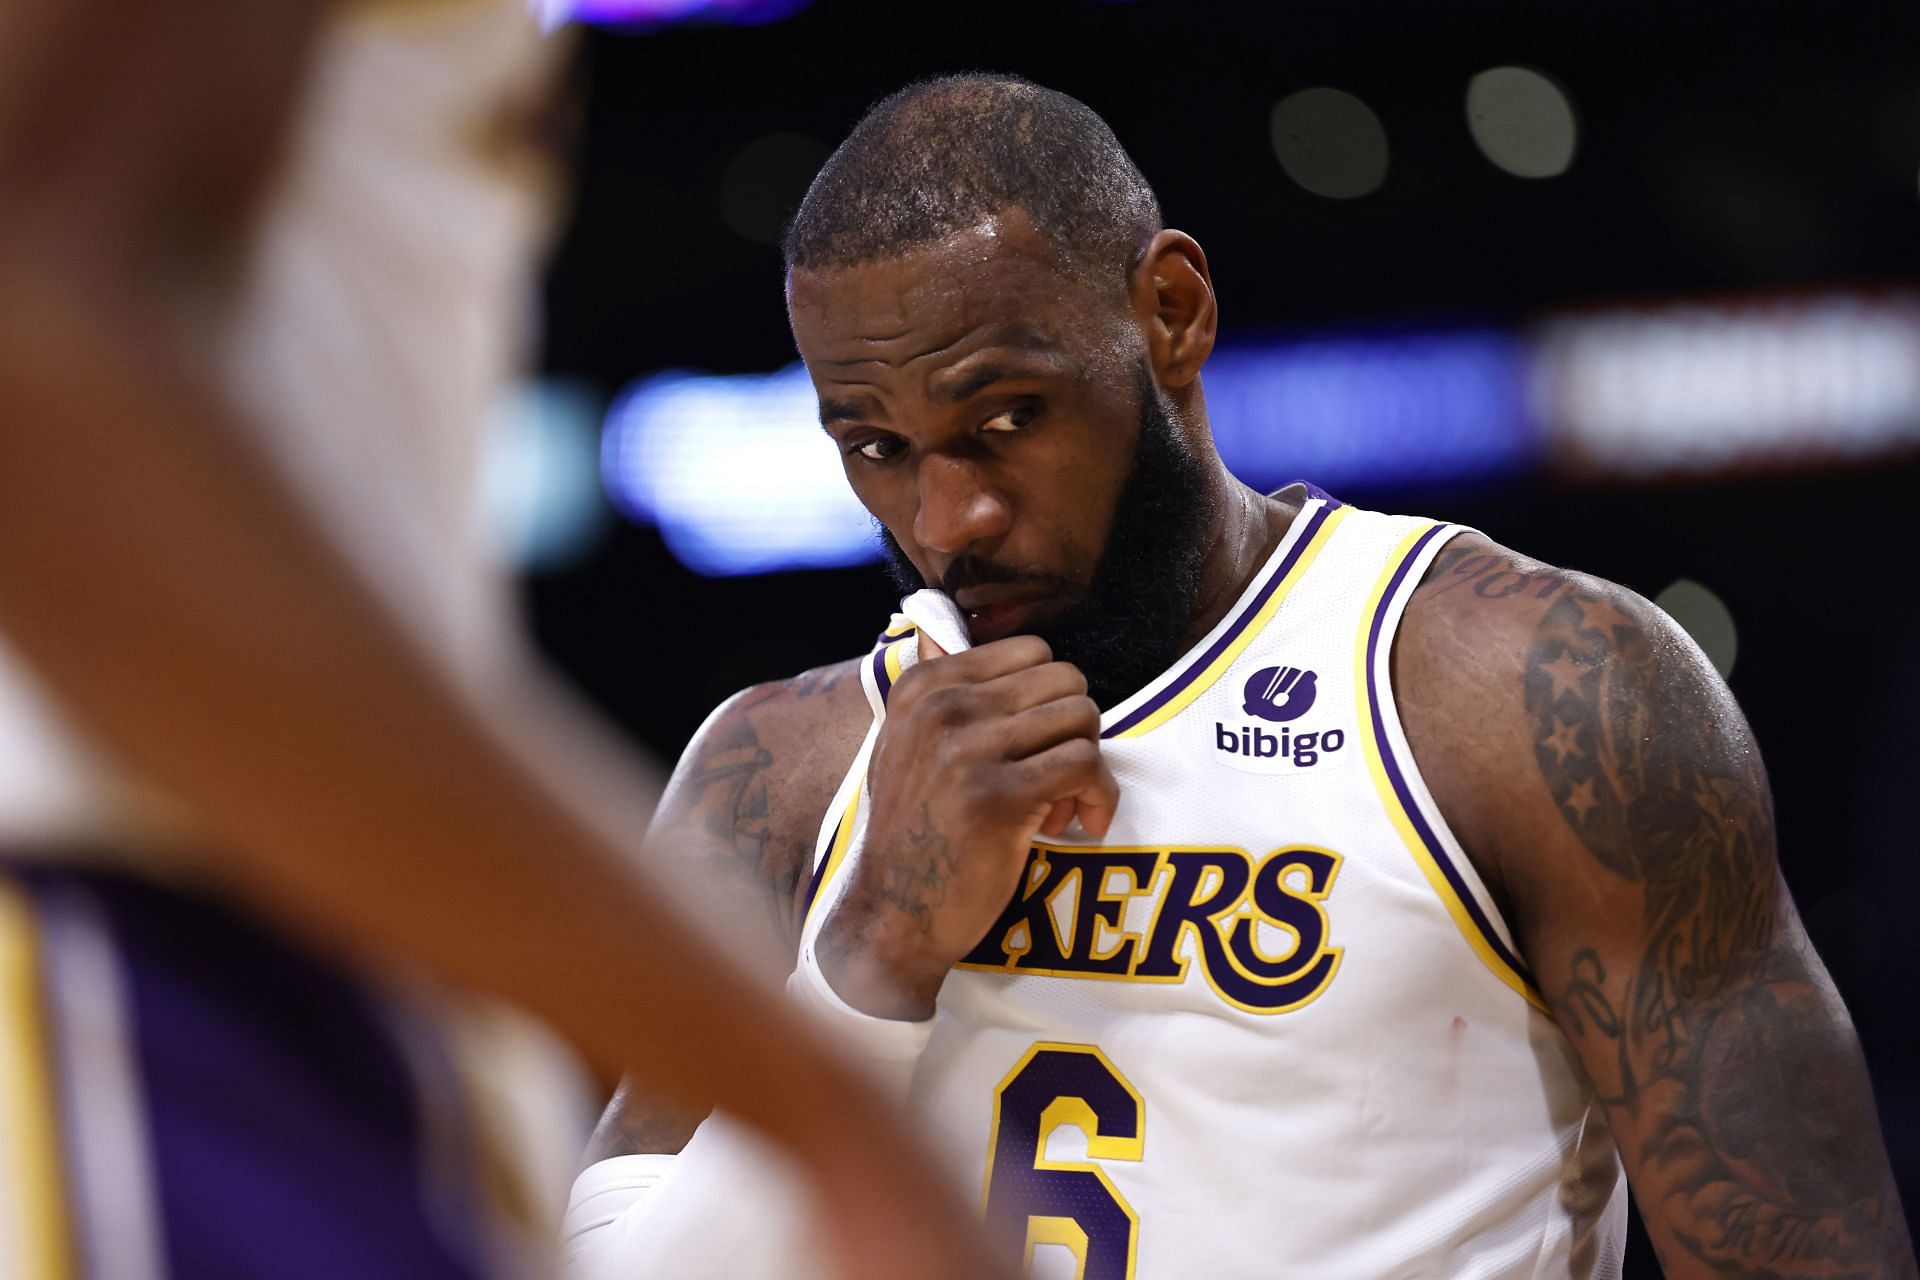 LeBron James matched his season-worst showing of seven turnovers against the New Orleans Pelicans